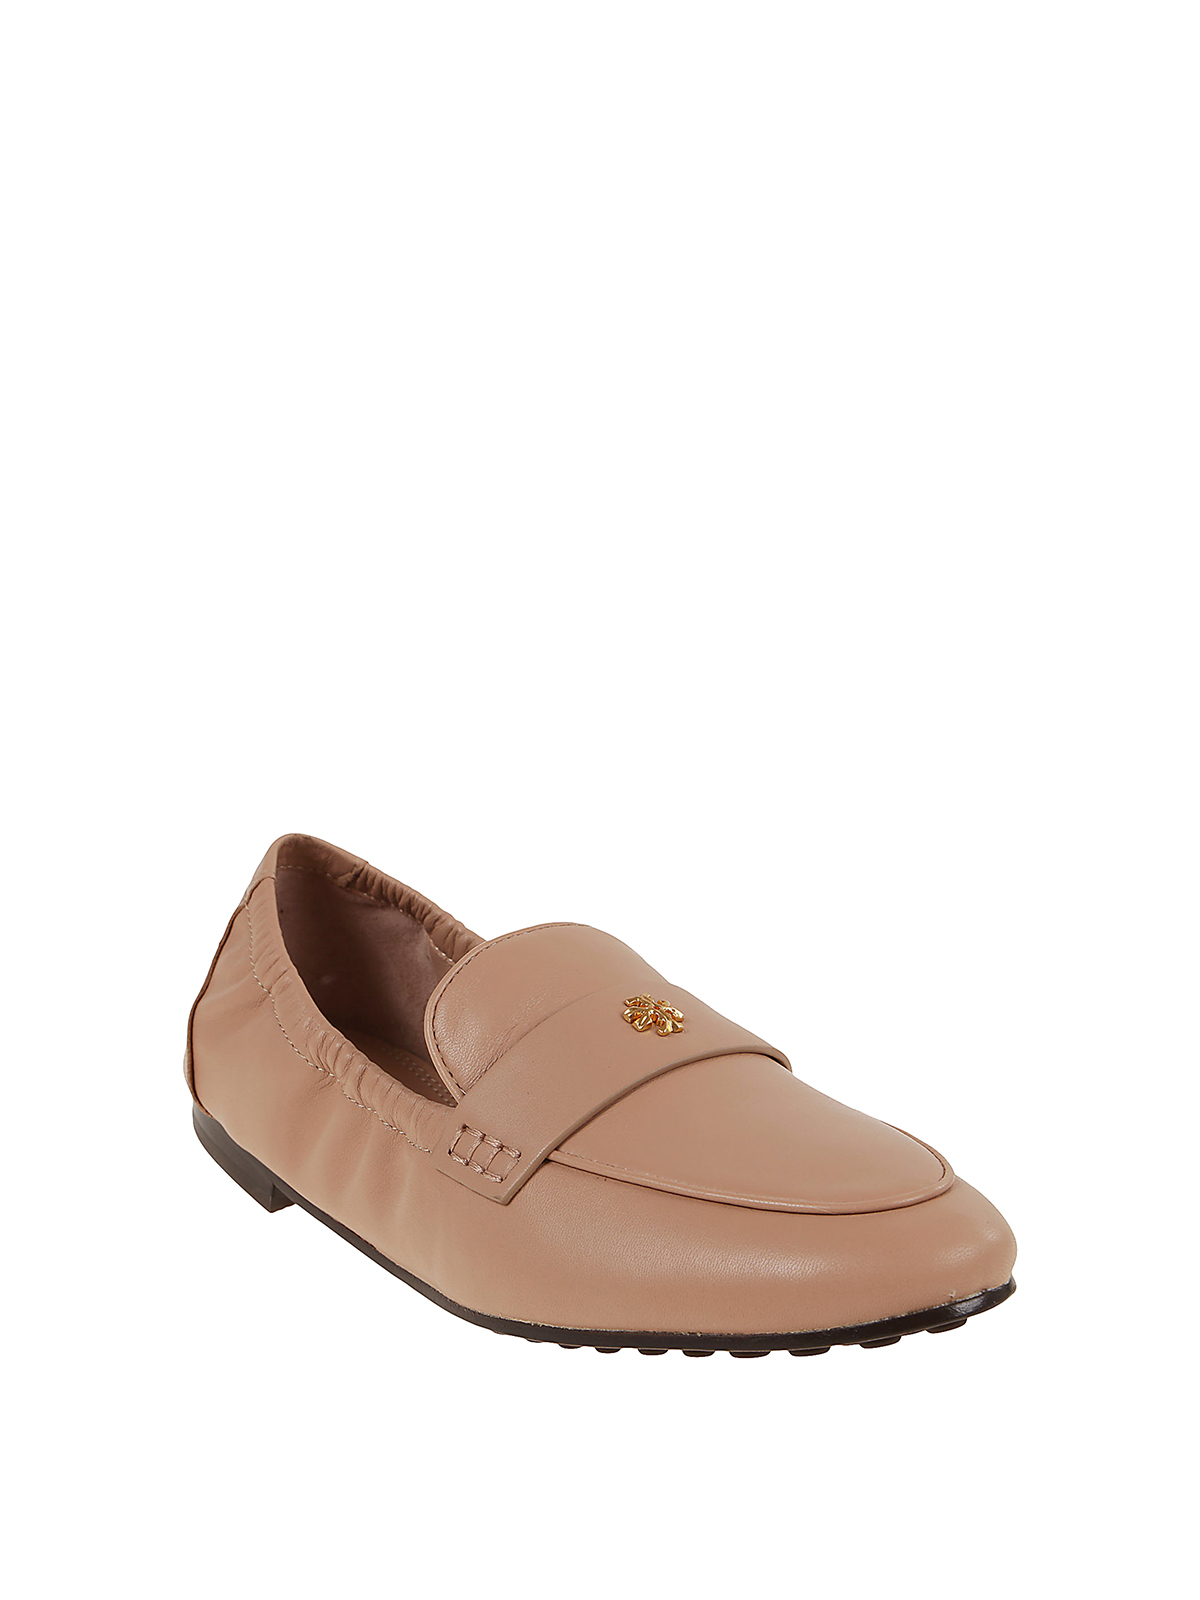 Loafers & Slippers Tory Burch - Logo detailed penny bar slippers - 87269236